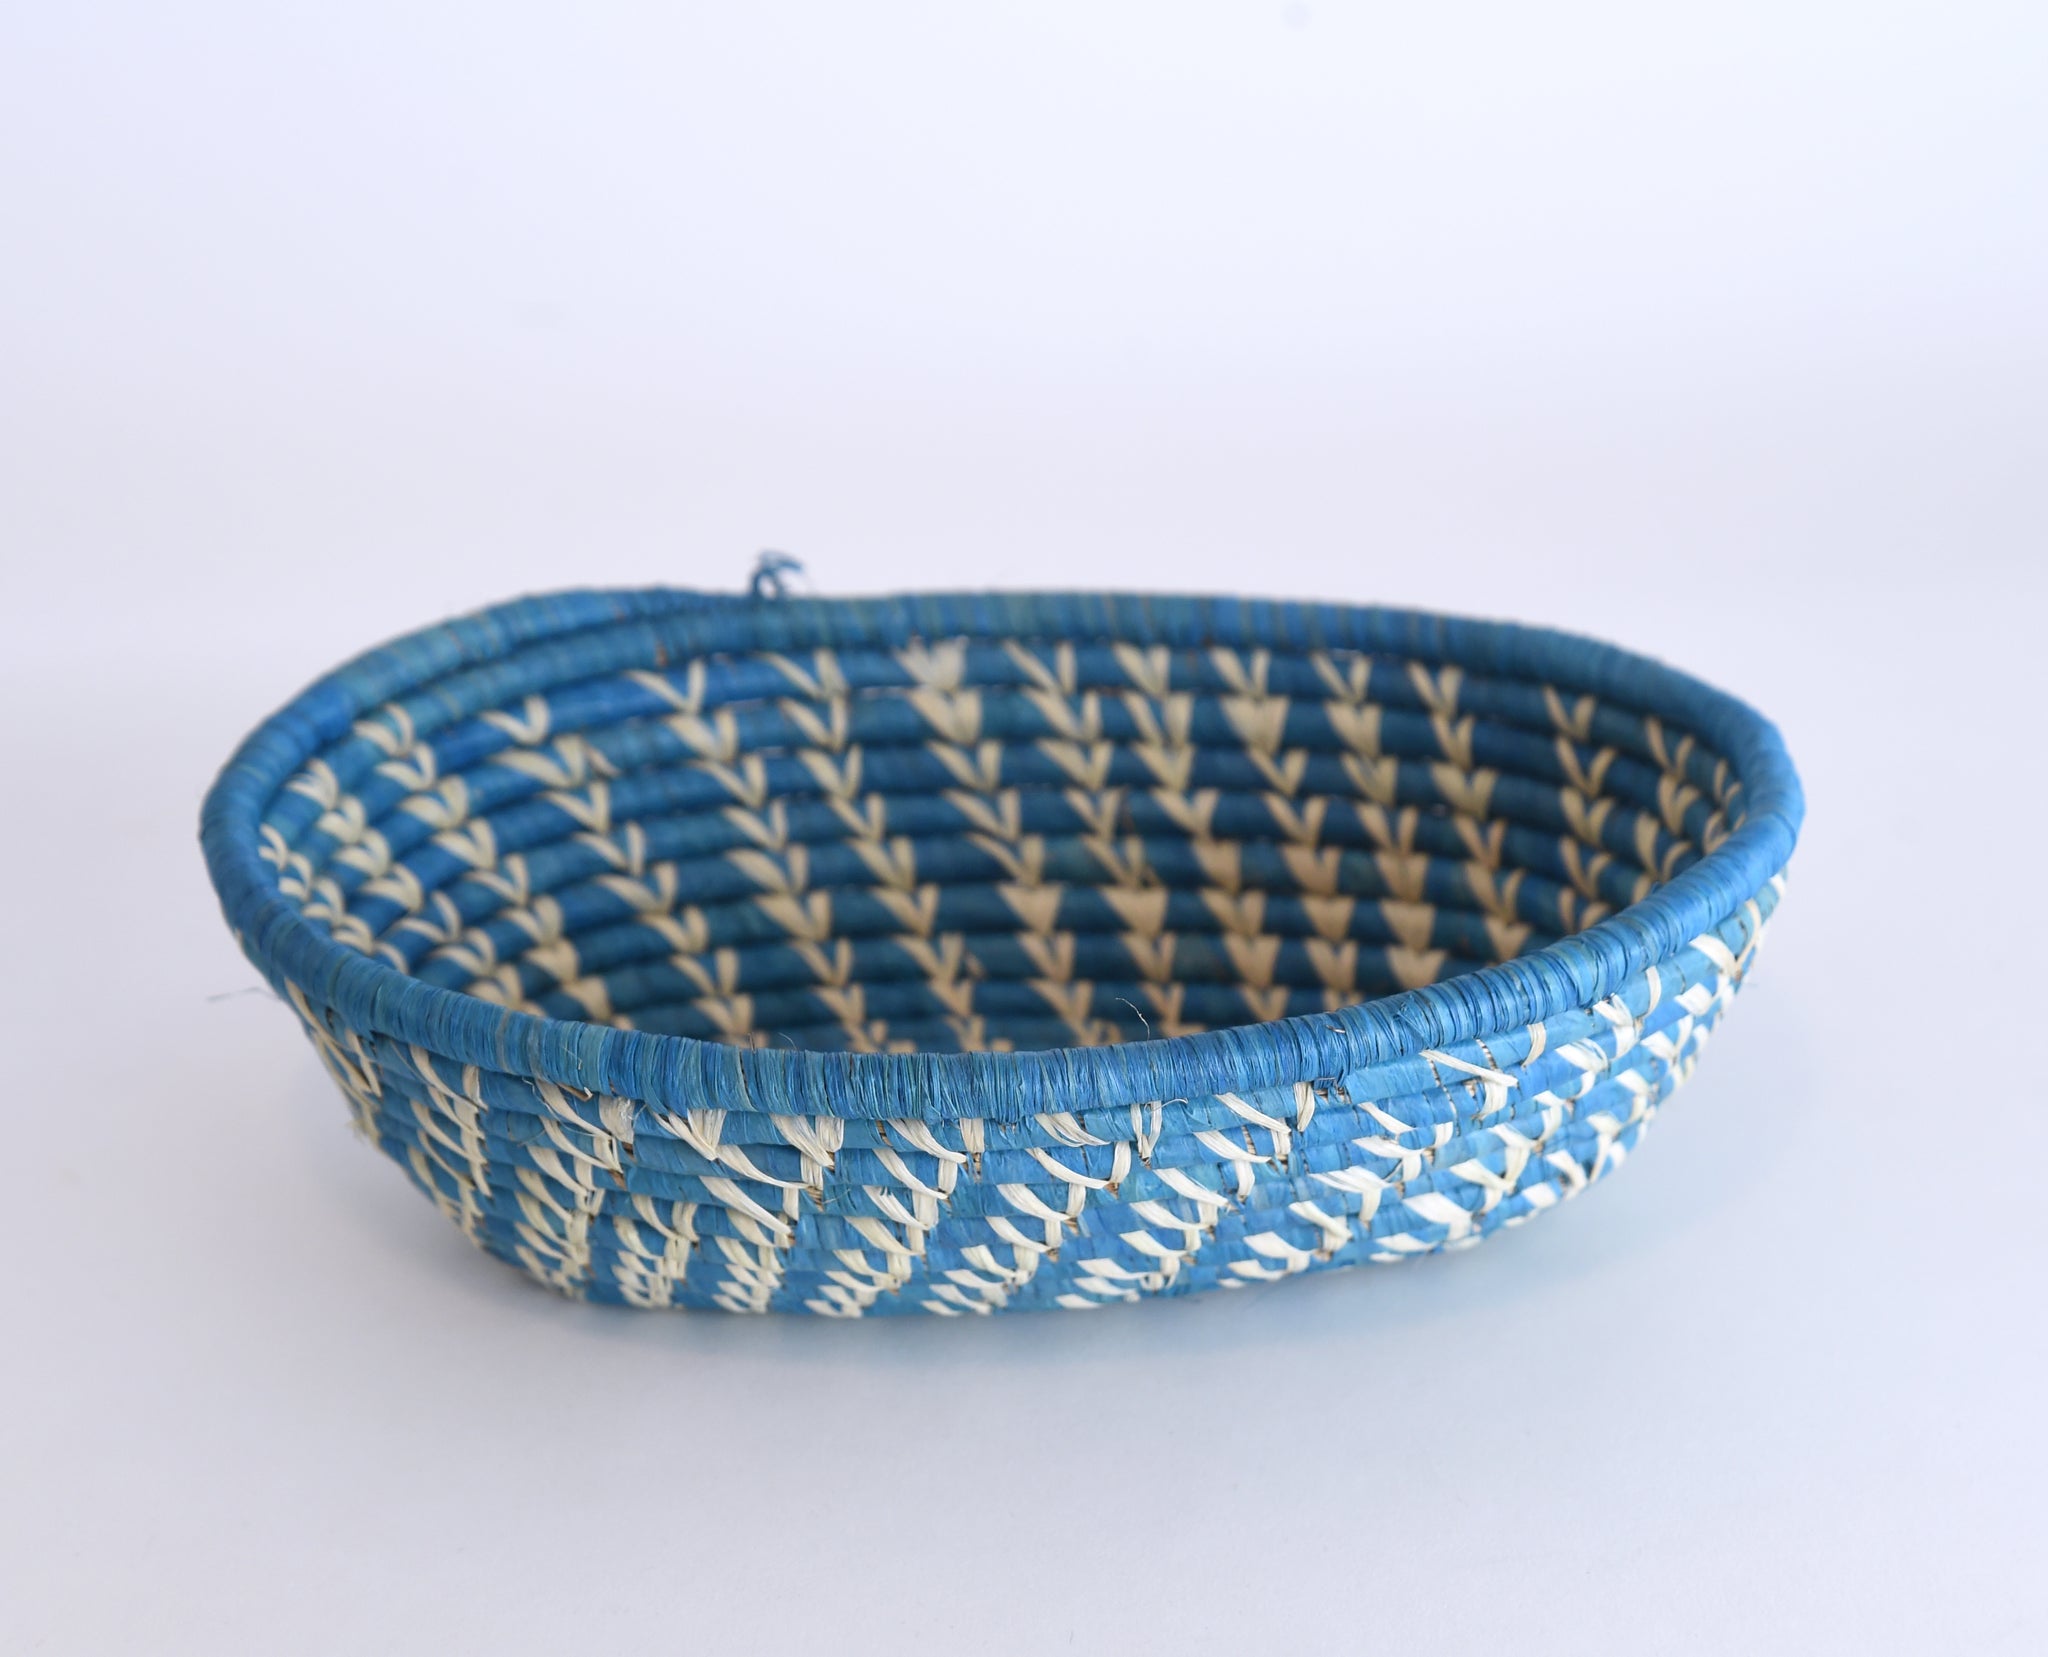 African Fair Trade Handwoven Striped Oval Knitting Basket, Silver/White